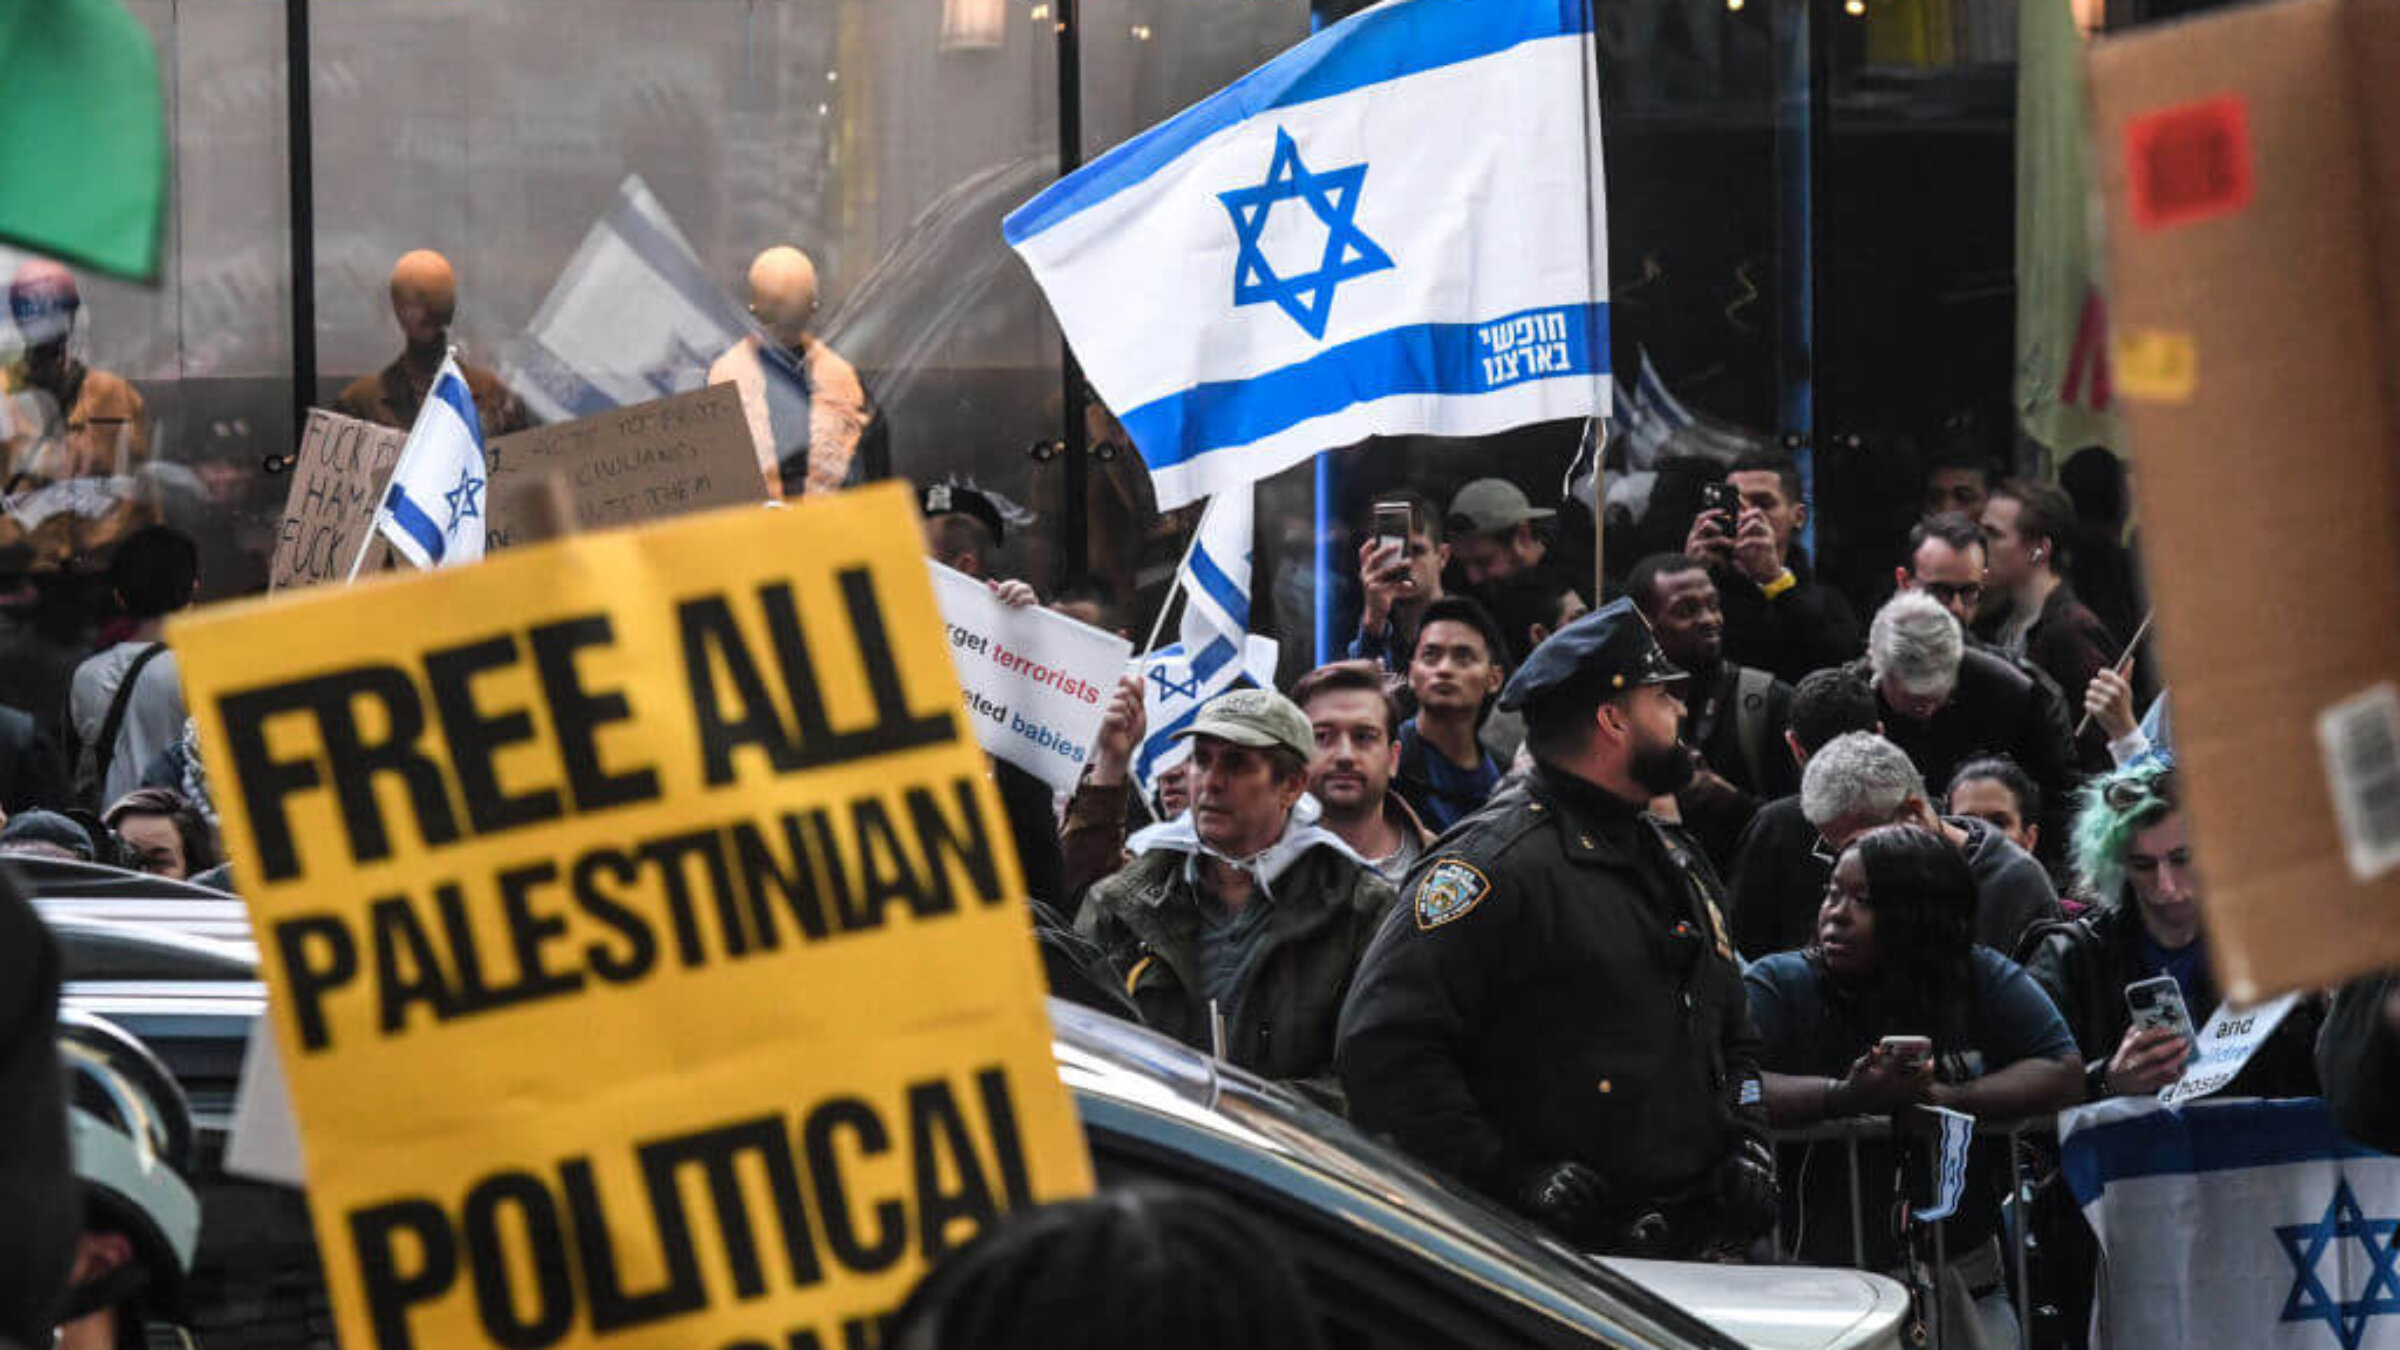 Pro-Israel activists counter demonstrate a Pro-Palestinian rally in New York City.